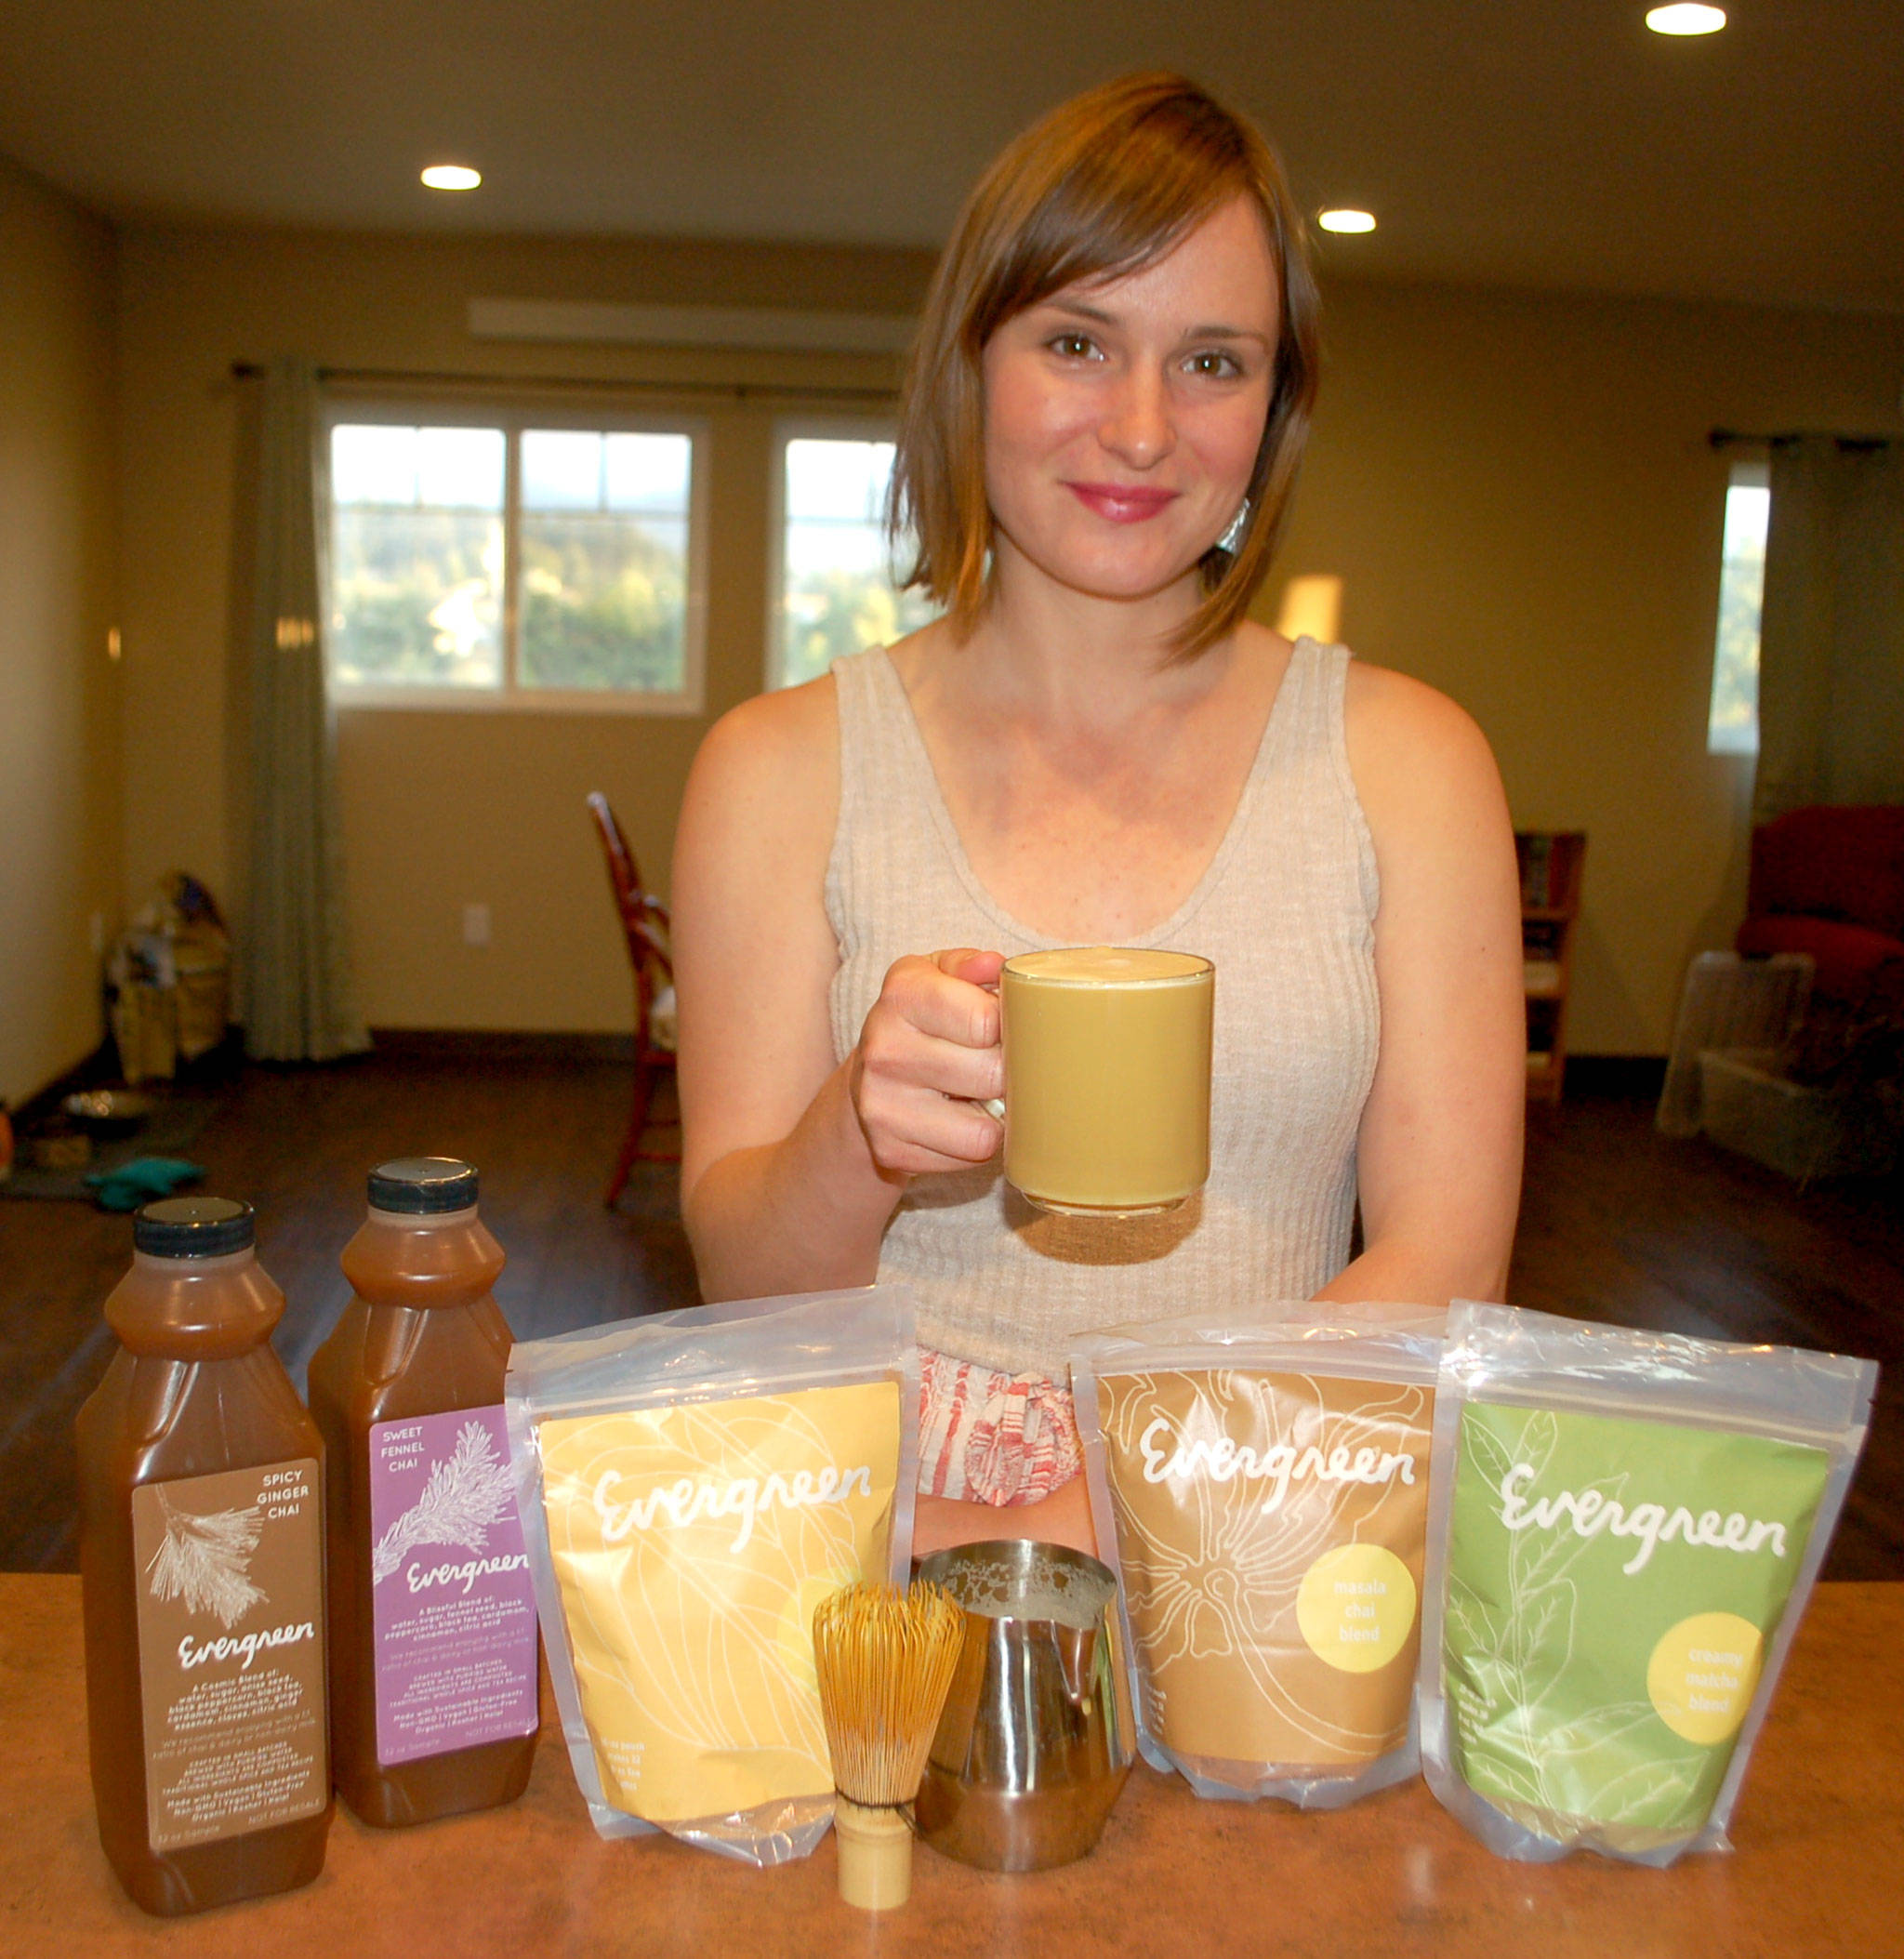 Sequim’s Julia Mader, founder of Evergreen Chai, is creating sustainable and eco-friendly chai tea products she sells to local coffee shops and businesses from Port Angeles to Seattle. Sequim Gazette photo by Erin Hawkins